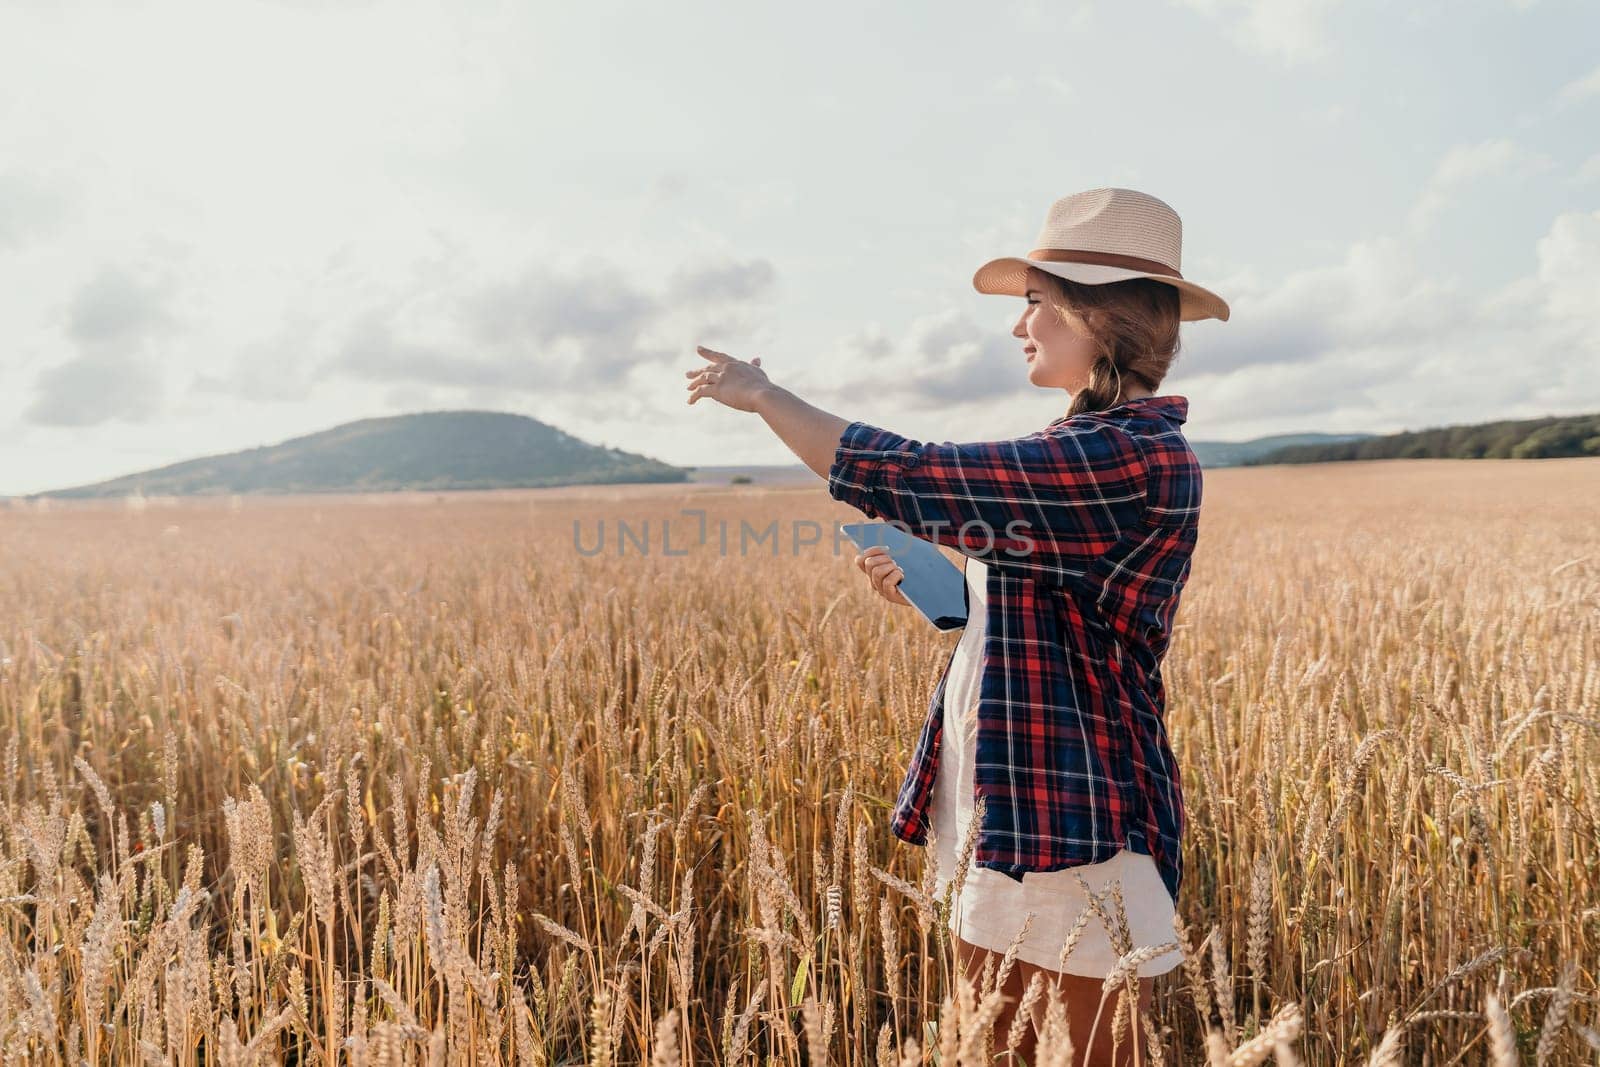 Woman farmer walks through a wheat field at sunset, touching green ears of wheat with his hands. Hand farmer is touching ears of wheat on field in sun, inspecting her harvest. Agricultural business.